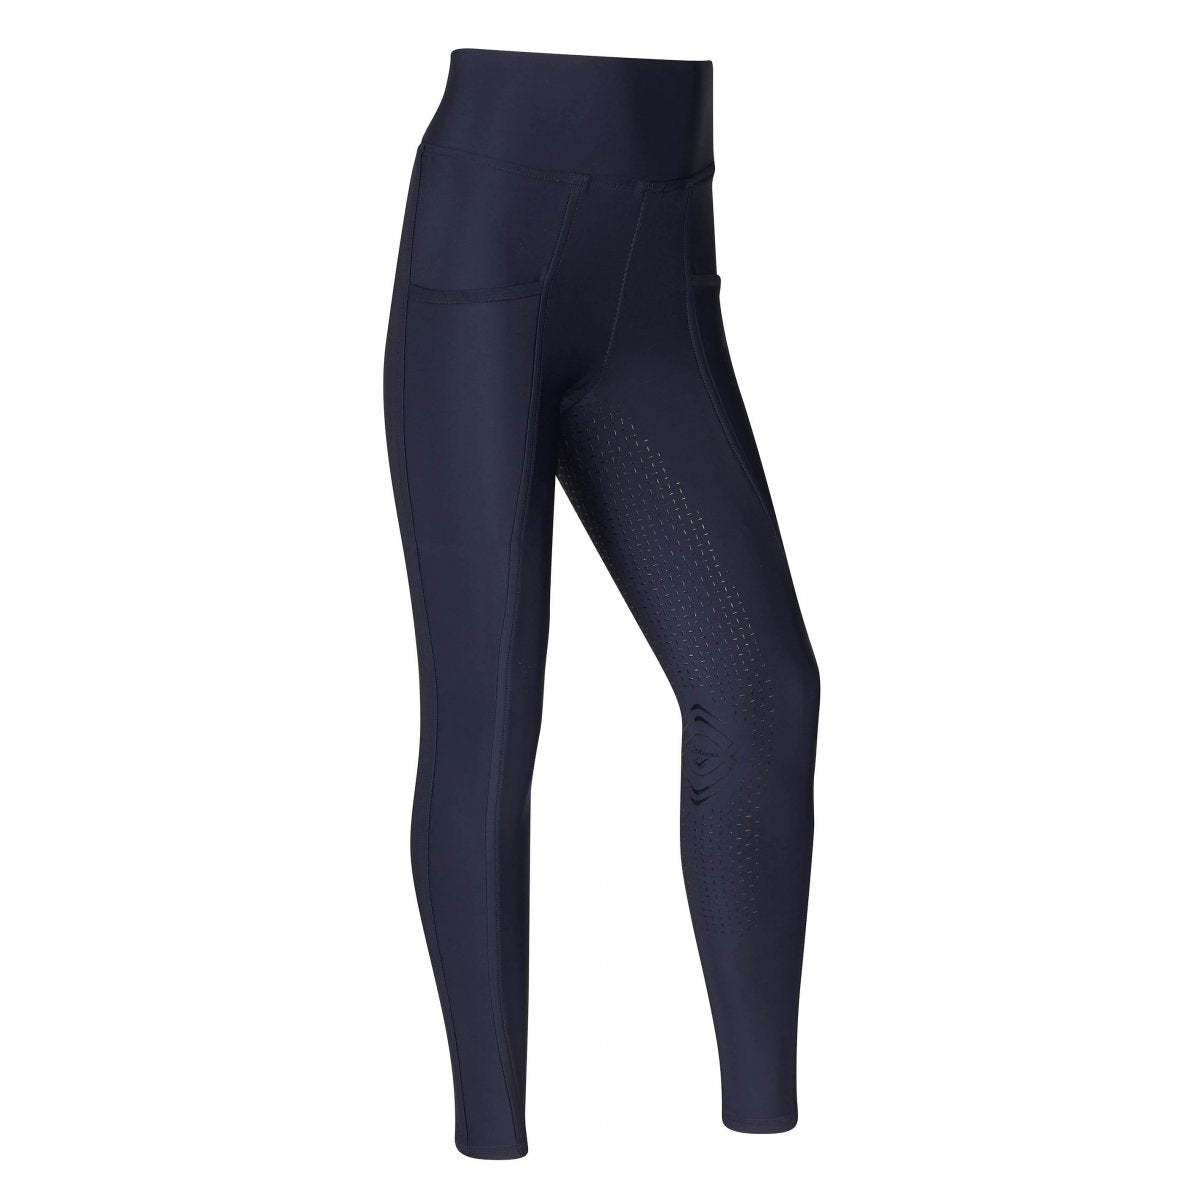 Navy blue horse riding tights with grip pattern on inner legs.